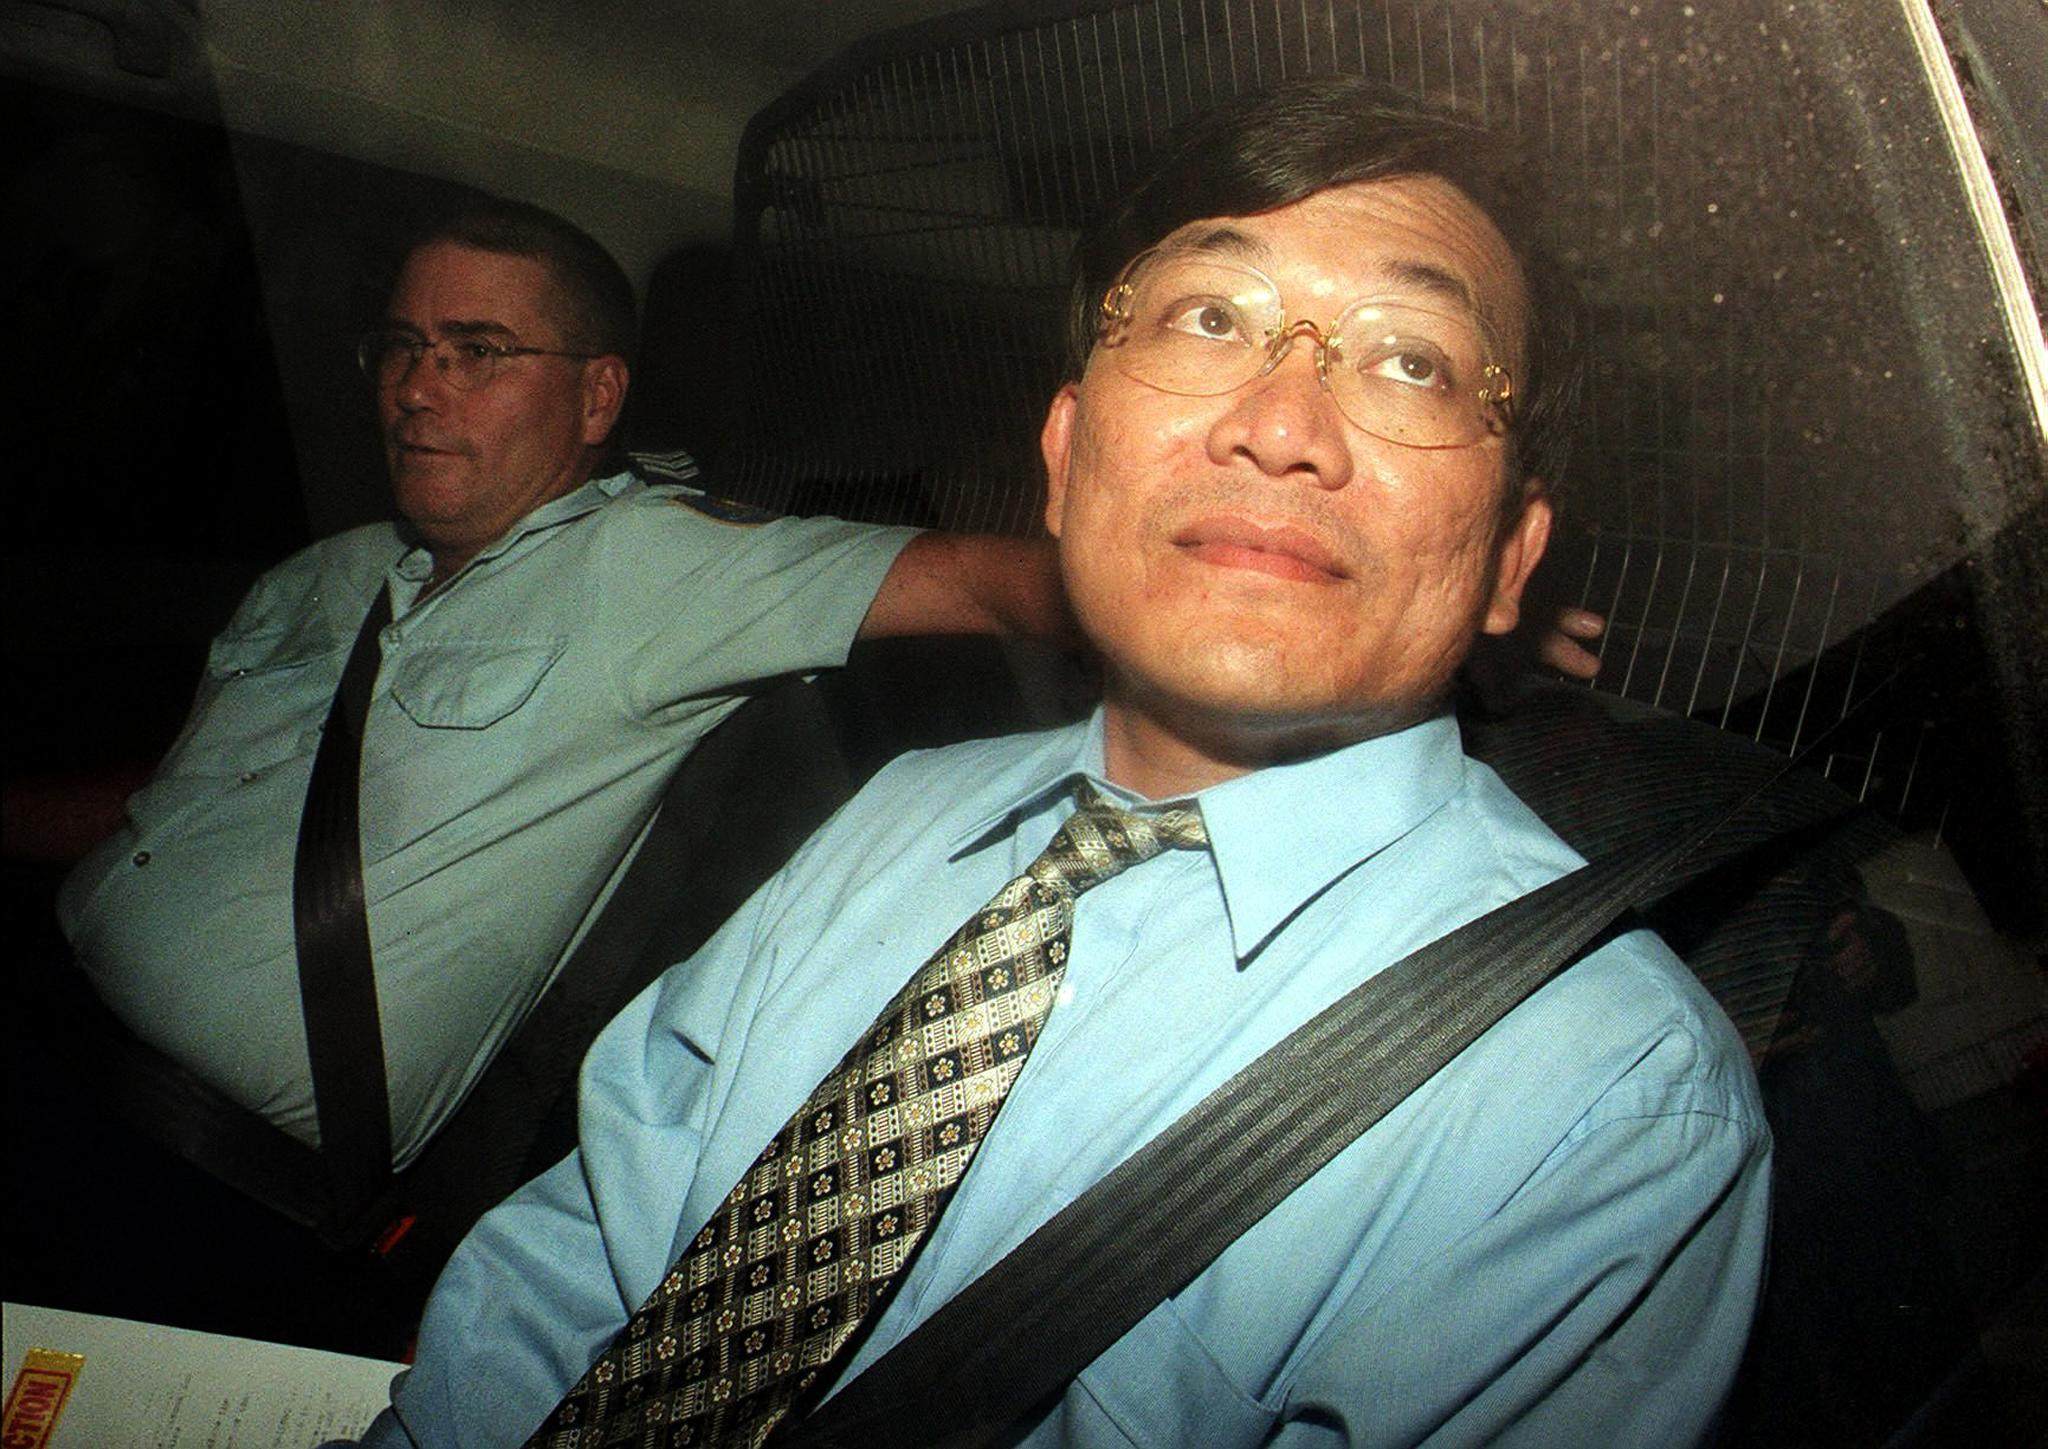 Phuong Canh Ngo leaves Darlinghurst court in Sydney.  Ngo, 42, a local government councillor and aspiring Labor Party parliamentarian, was convicted of murdering MP John Newman. Photo AFP